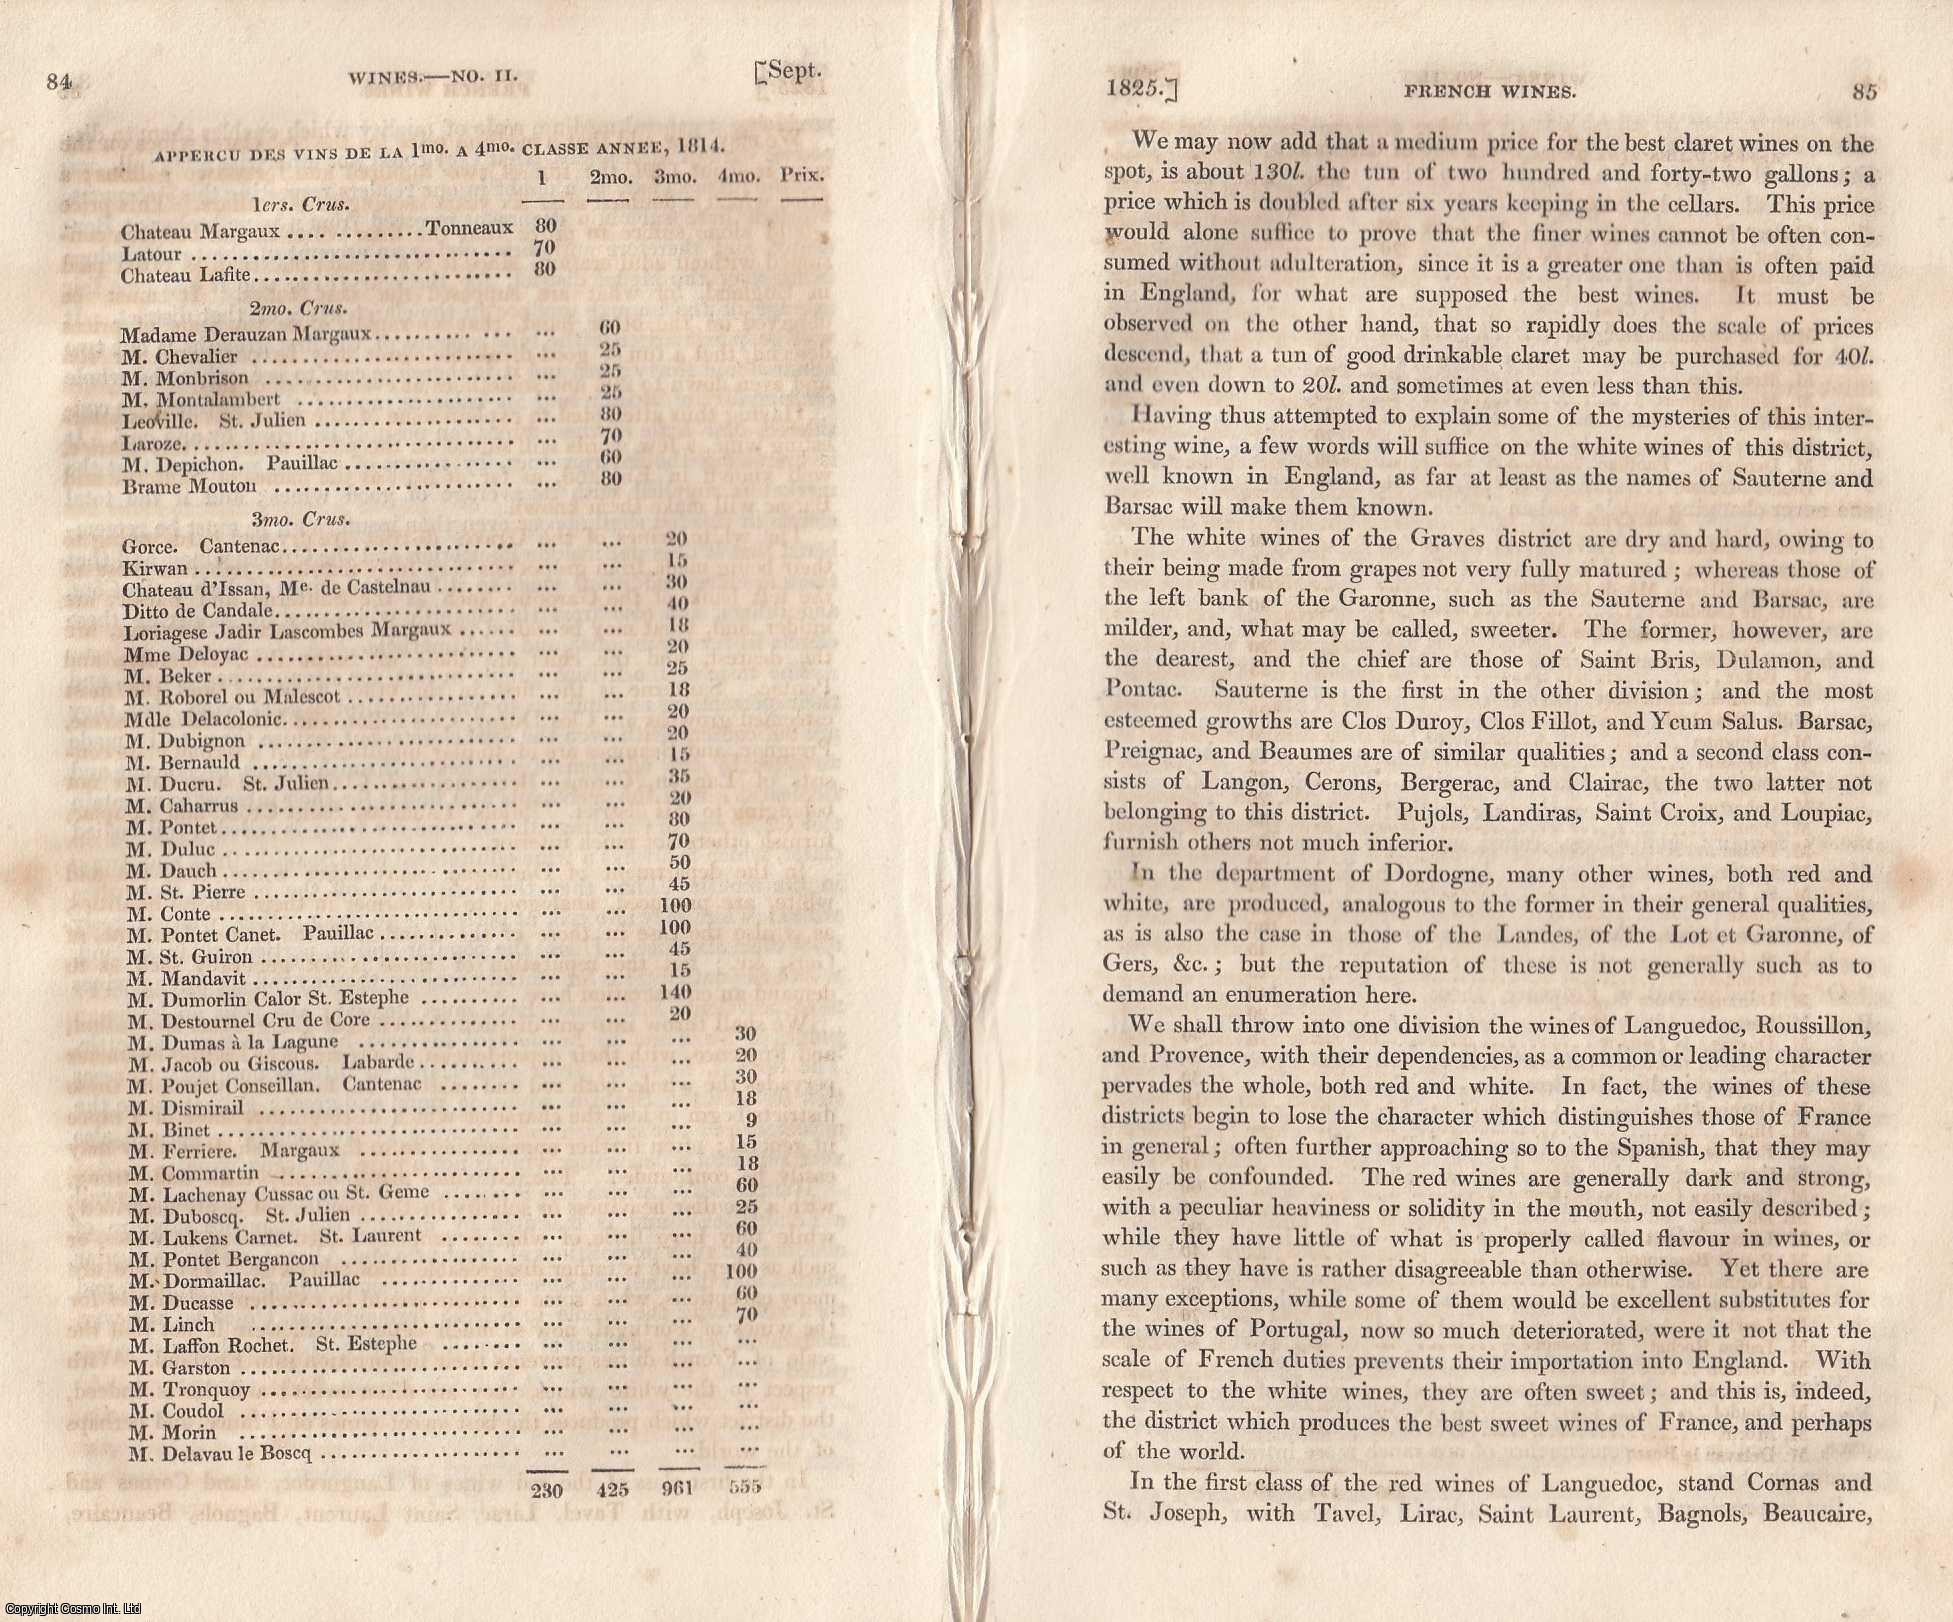 London Magazine - French Wines. An original essay from The London Magazine, 1825. No author is given for this article.